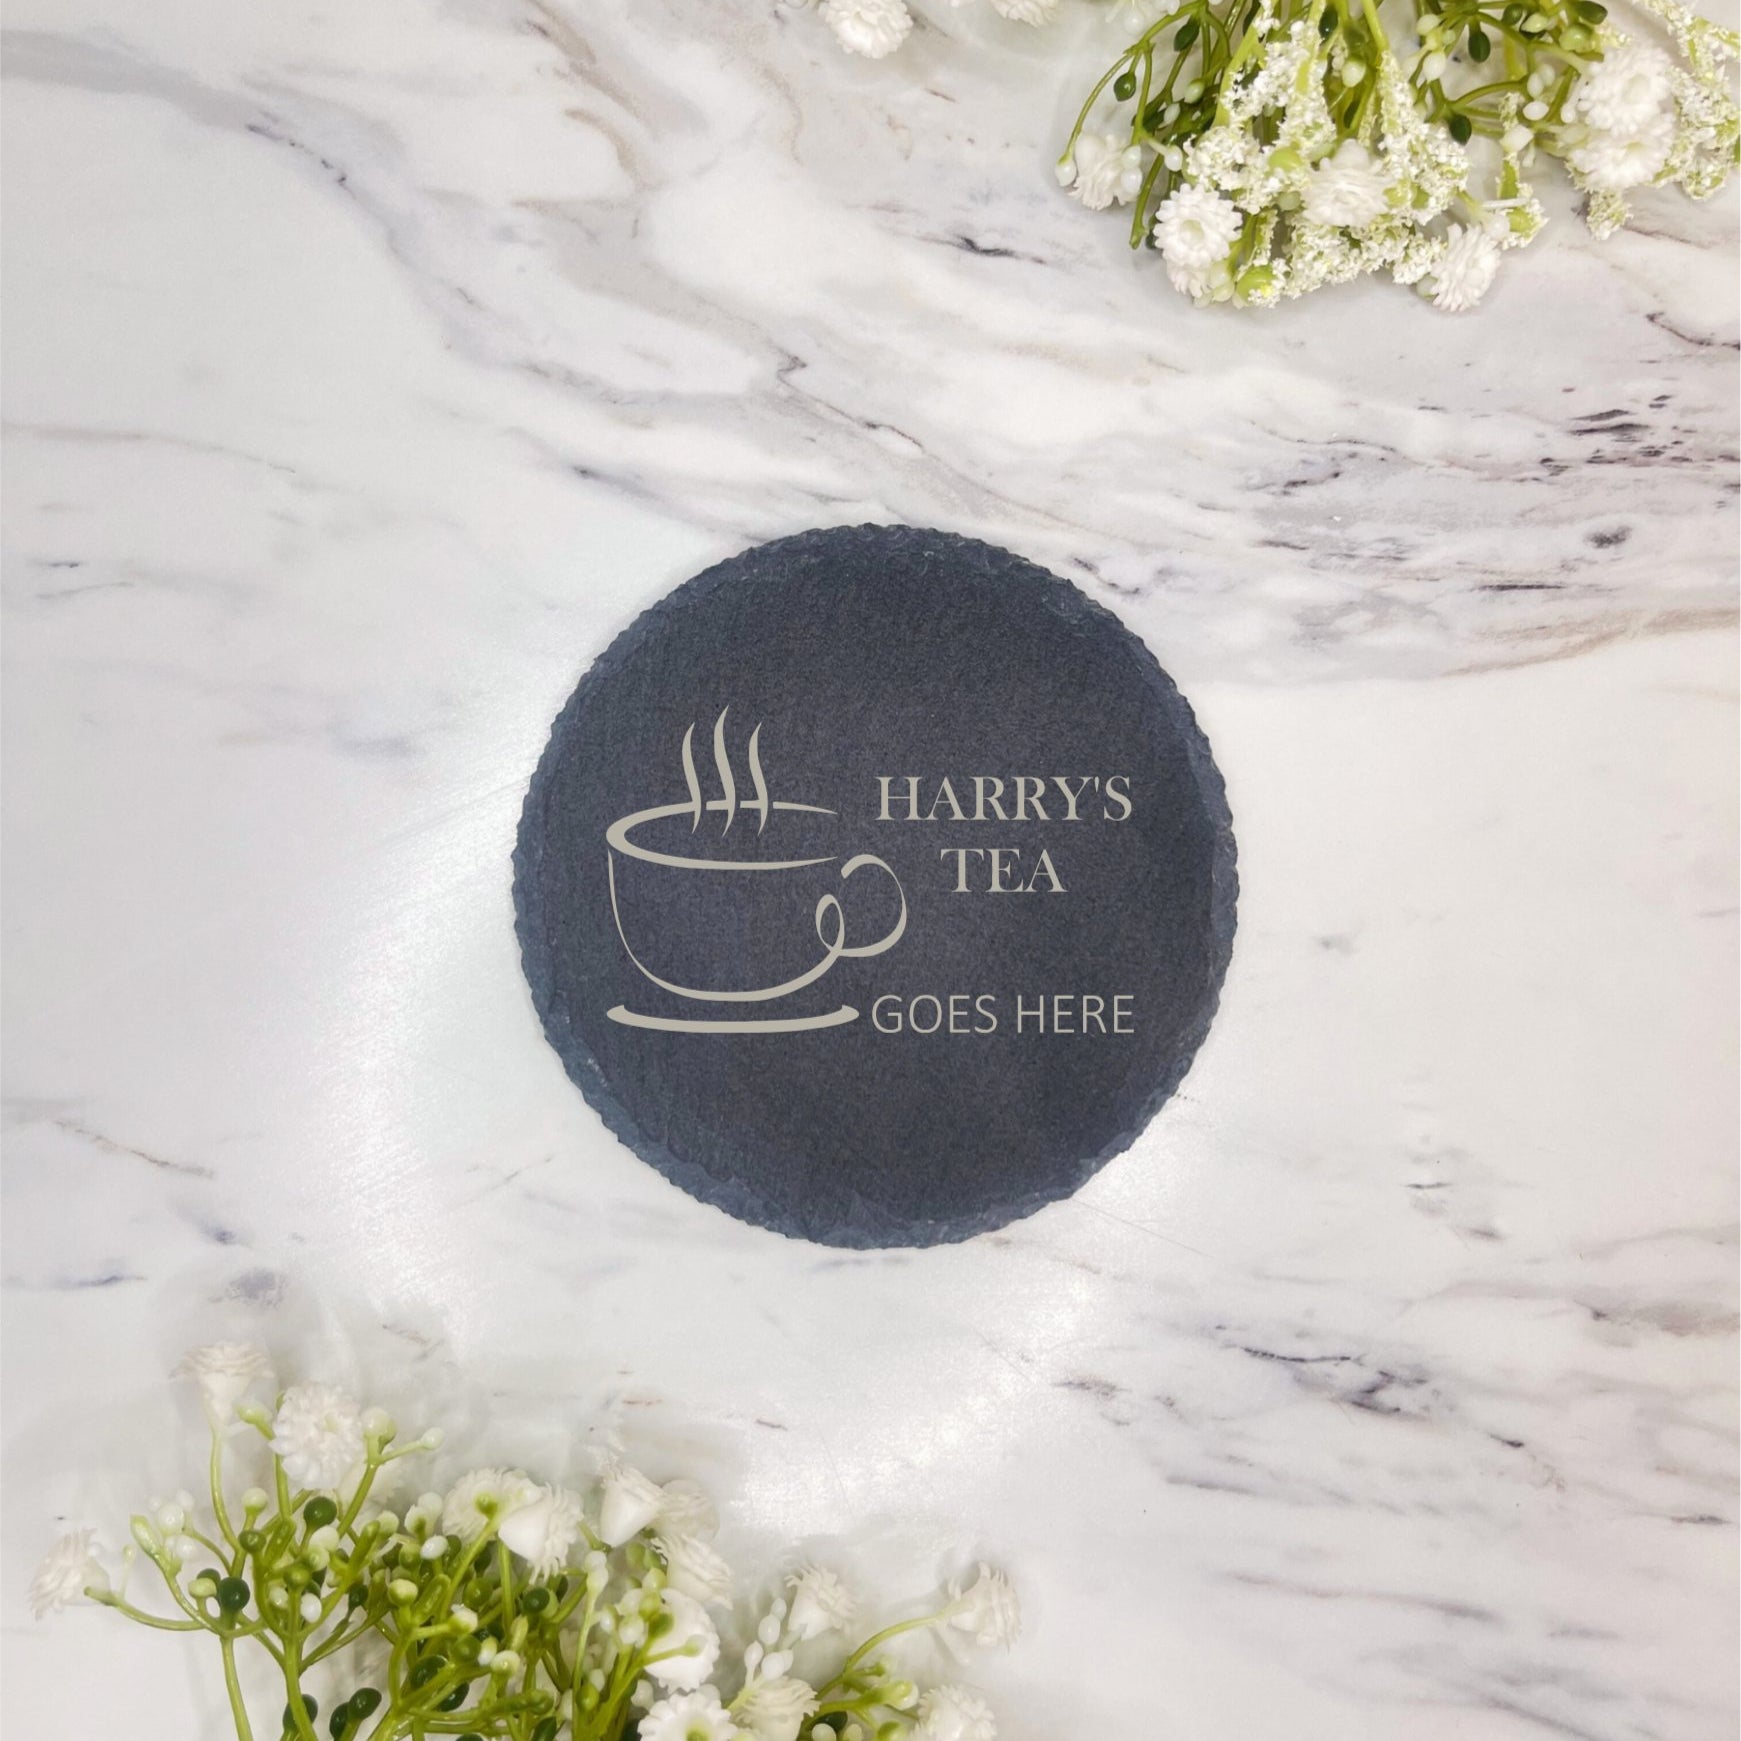 Personalised laser-engraved round slate coaster with custom name and coffee cup design, a charming and practical gift idea for coffee lovers